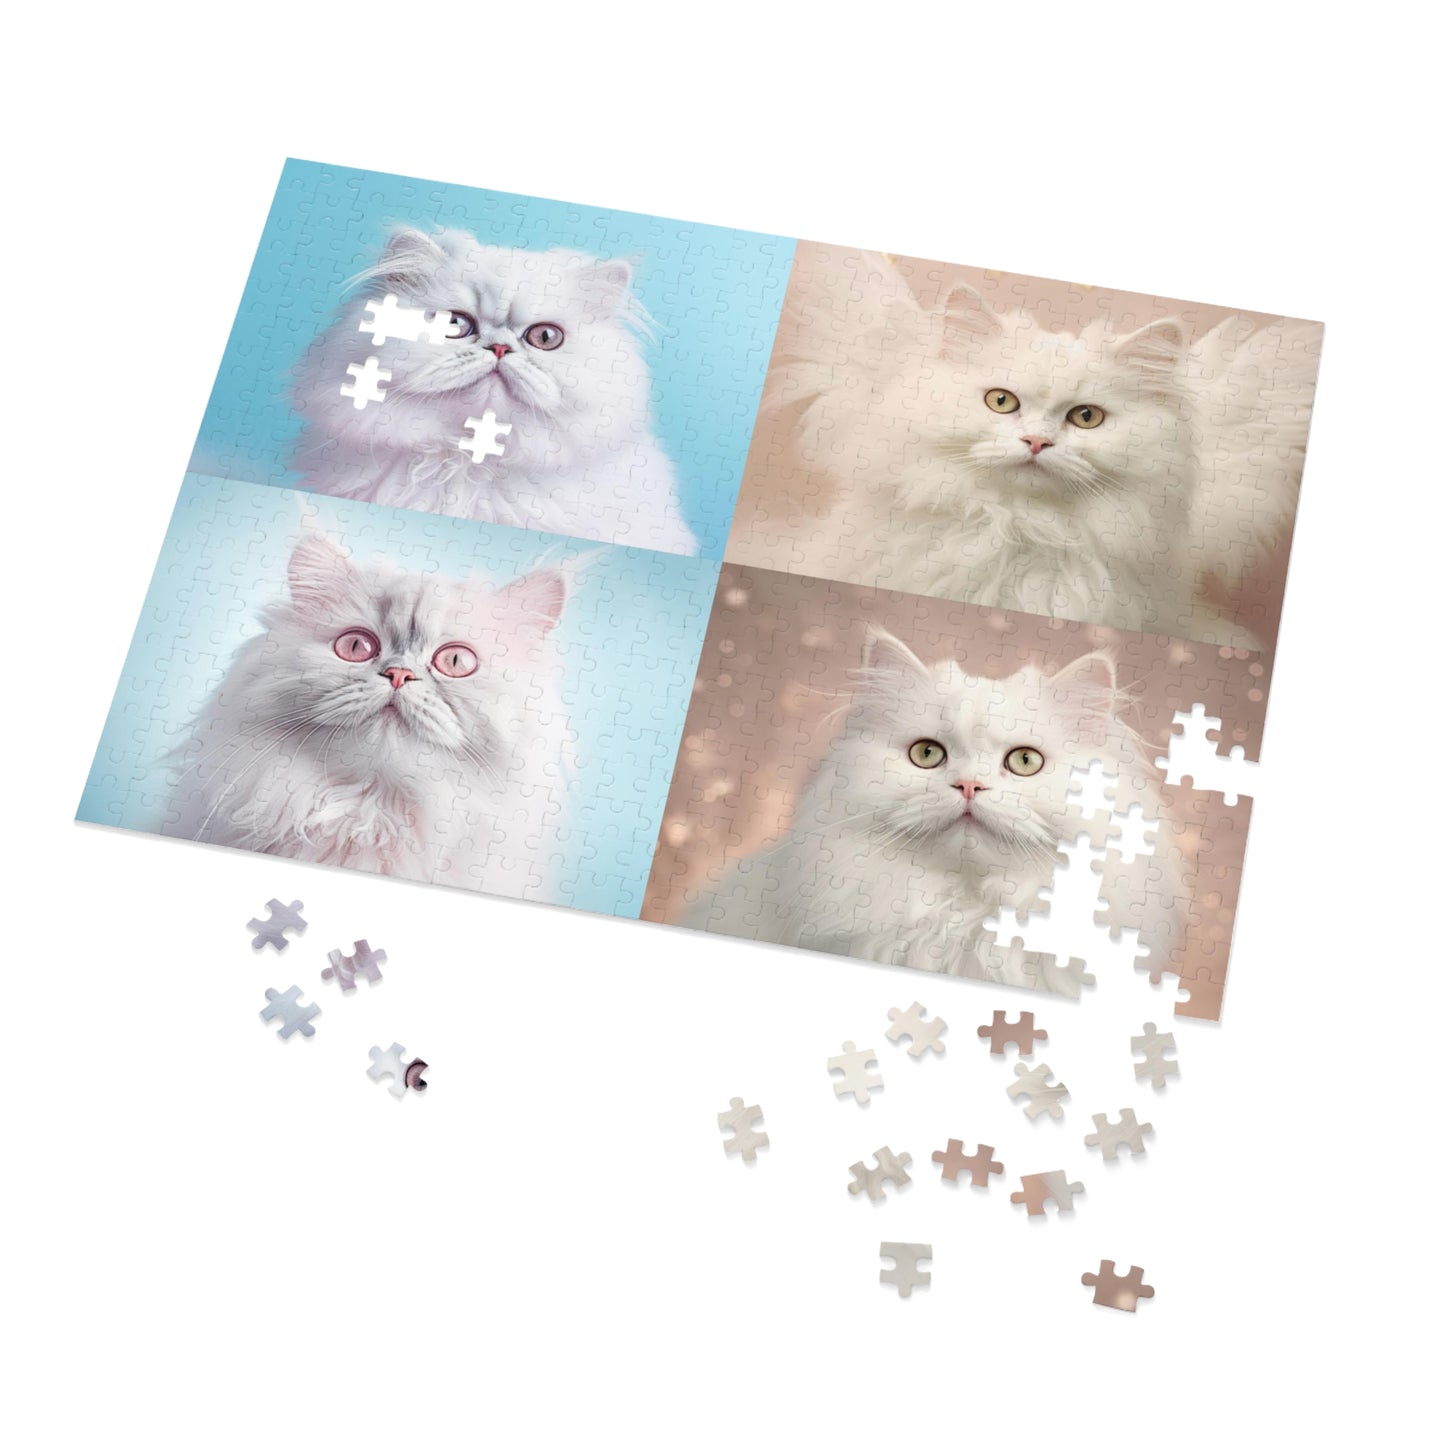 4 Angelic Cats • Jigsaw Puzzle